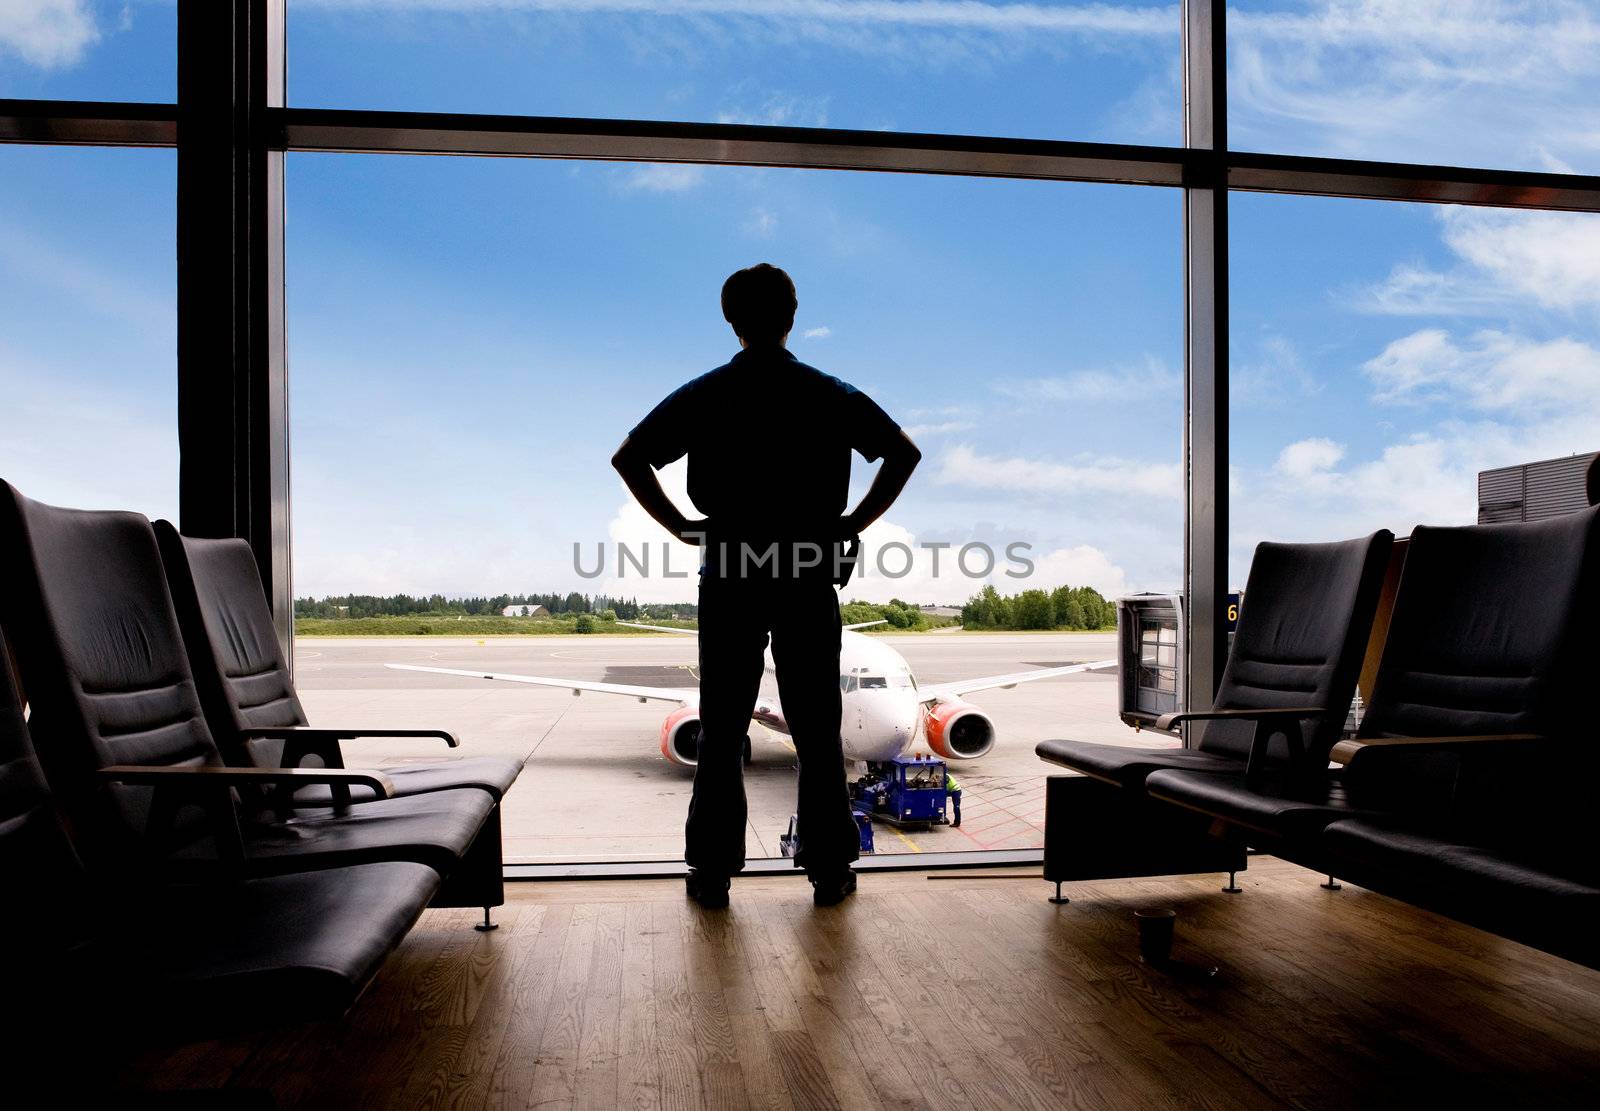 A male waits in a terminal at an airport